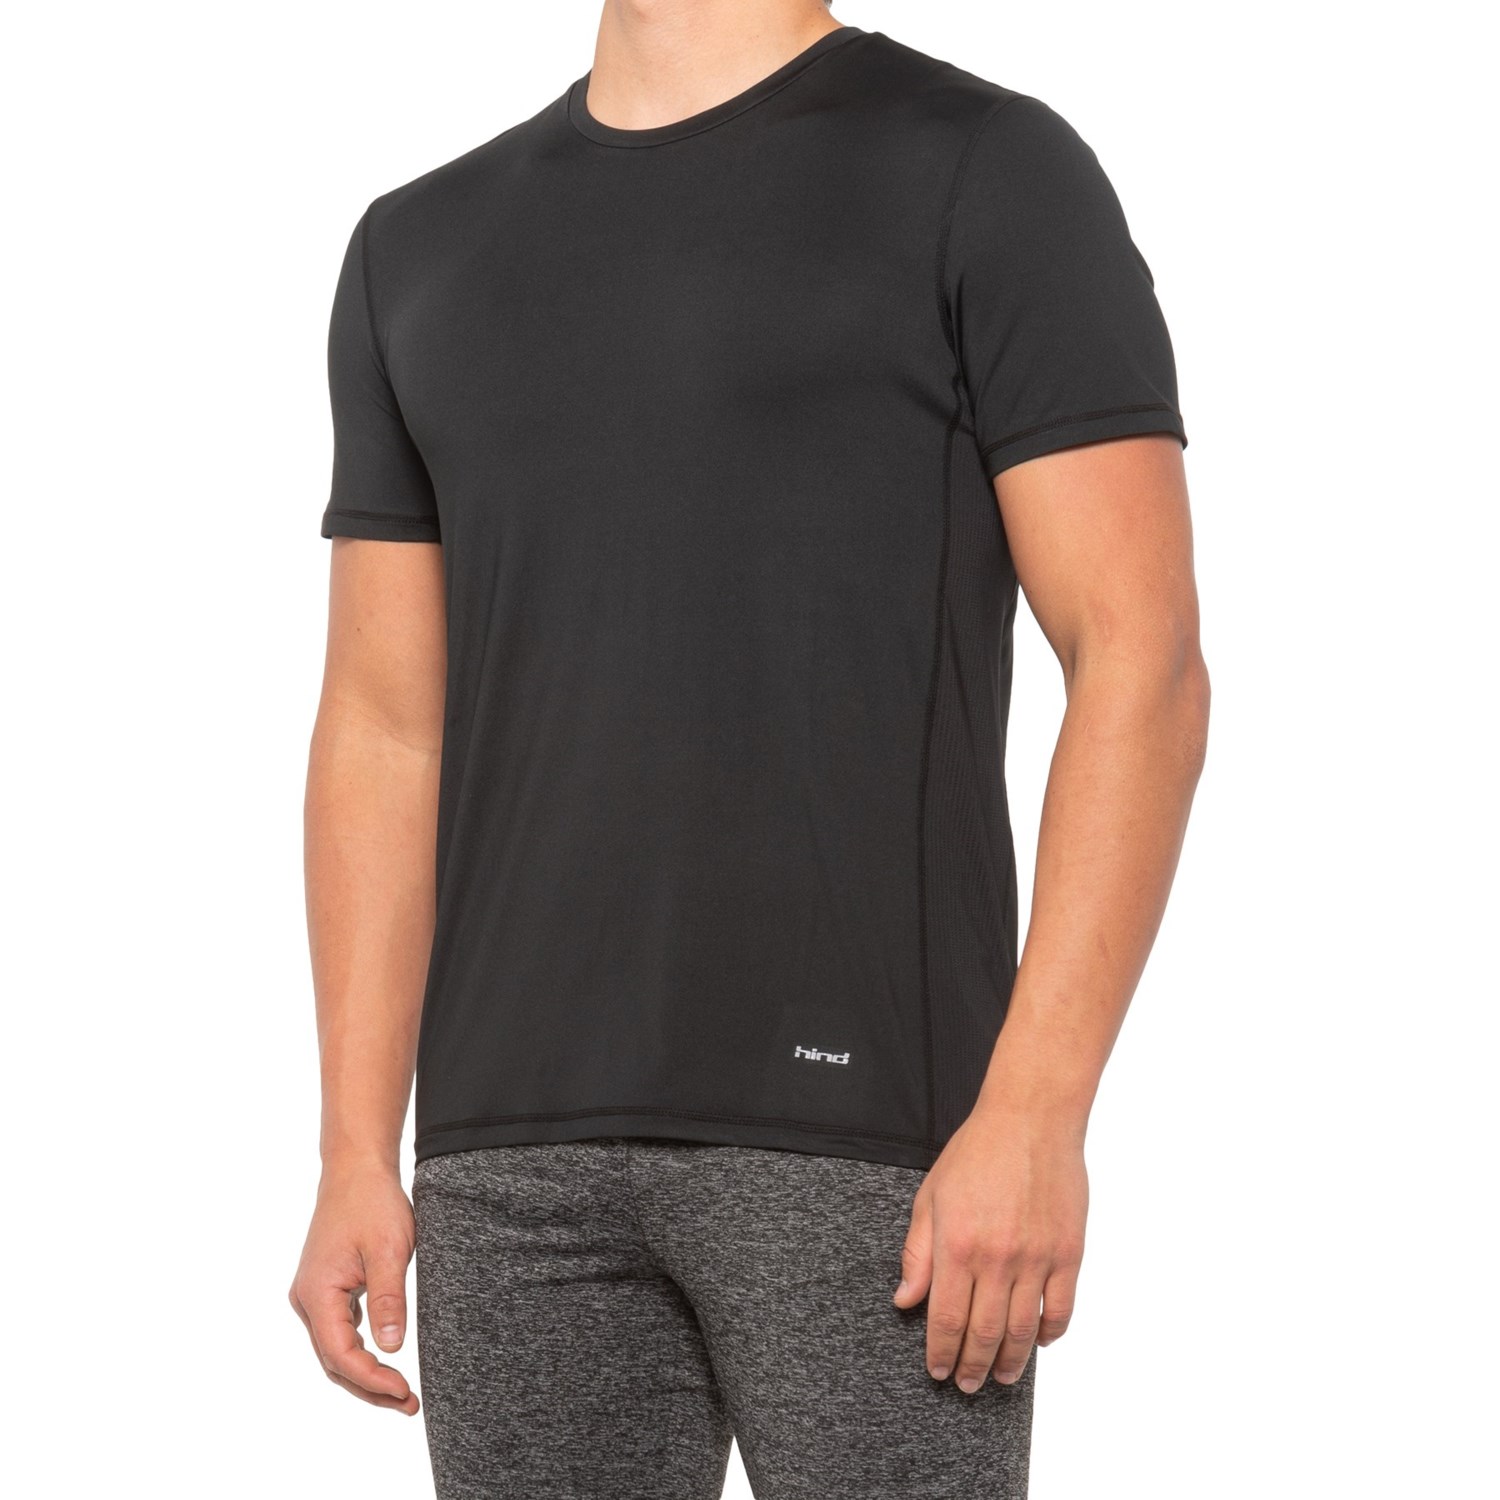 Hind Mesh Panel T-Shirt (For Men) - Save 50%